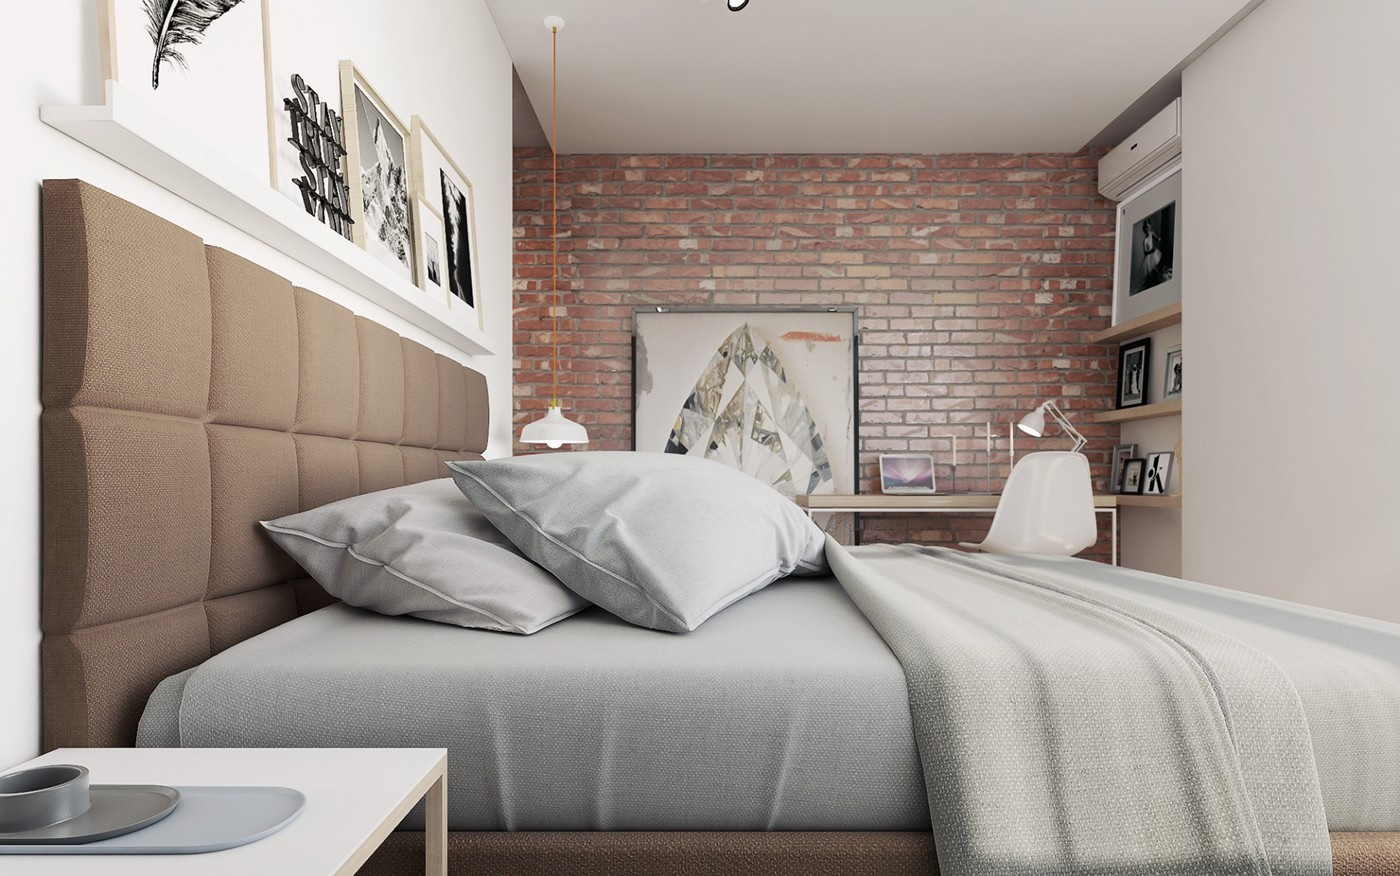 Brick Accent Wall Bedroom
 Color bo Inspiration Wood Interiors With Grey Accents